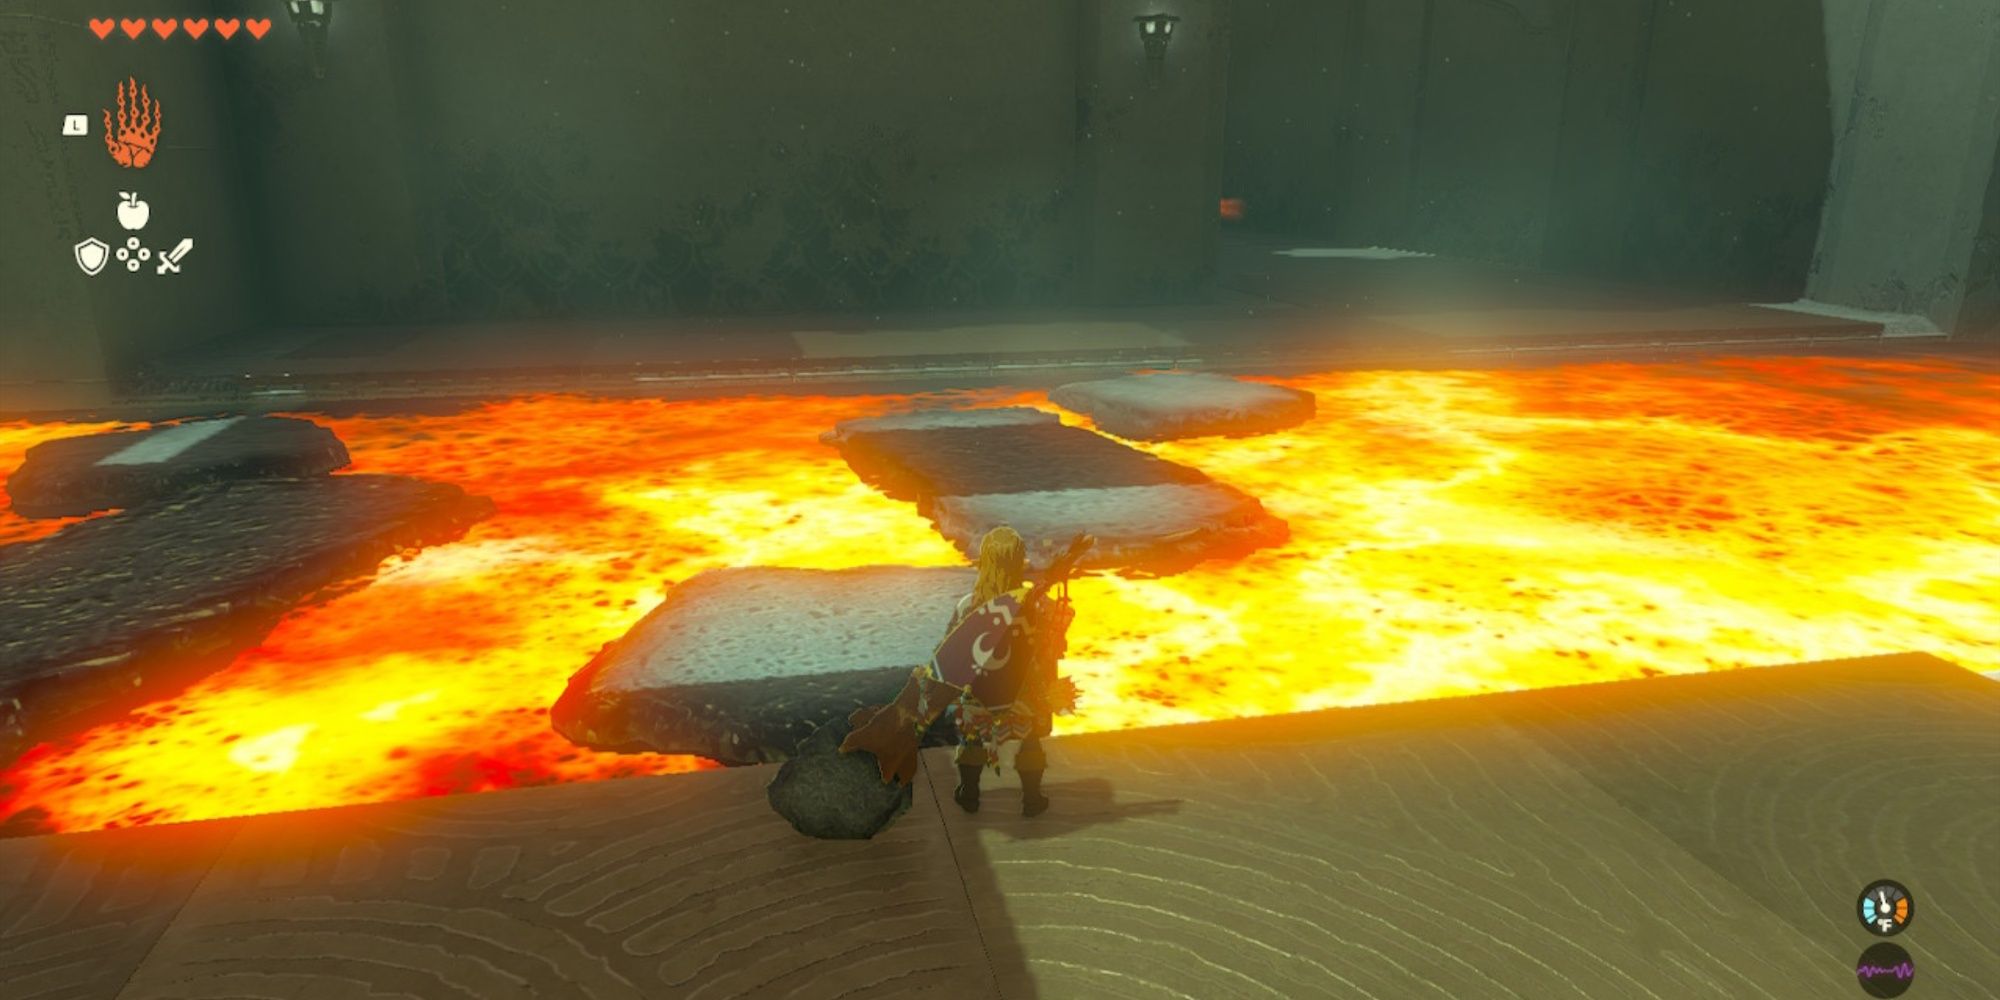 Link prepares to jump over a lava platform formed out of water at the Temple of Timawak in The Legend of Zelda: Kingdom of Tears.